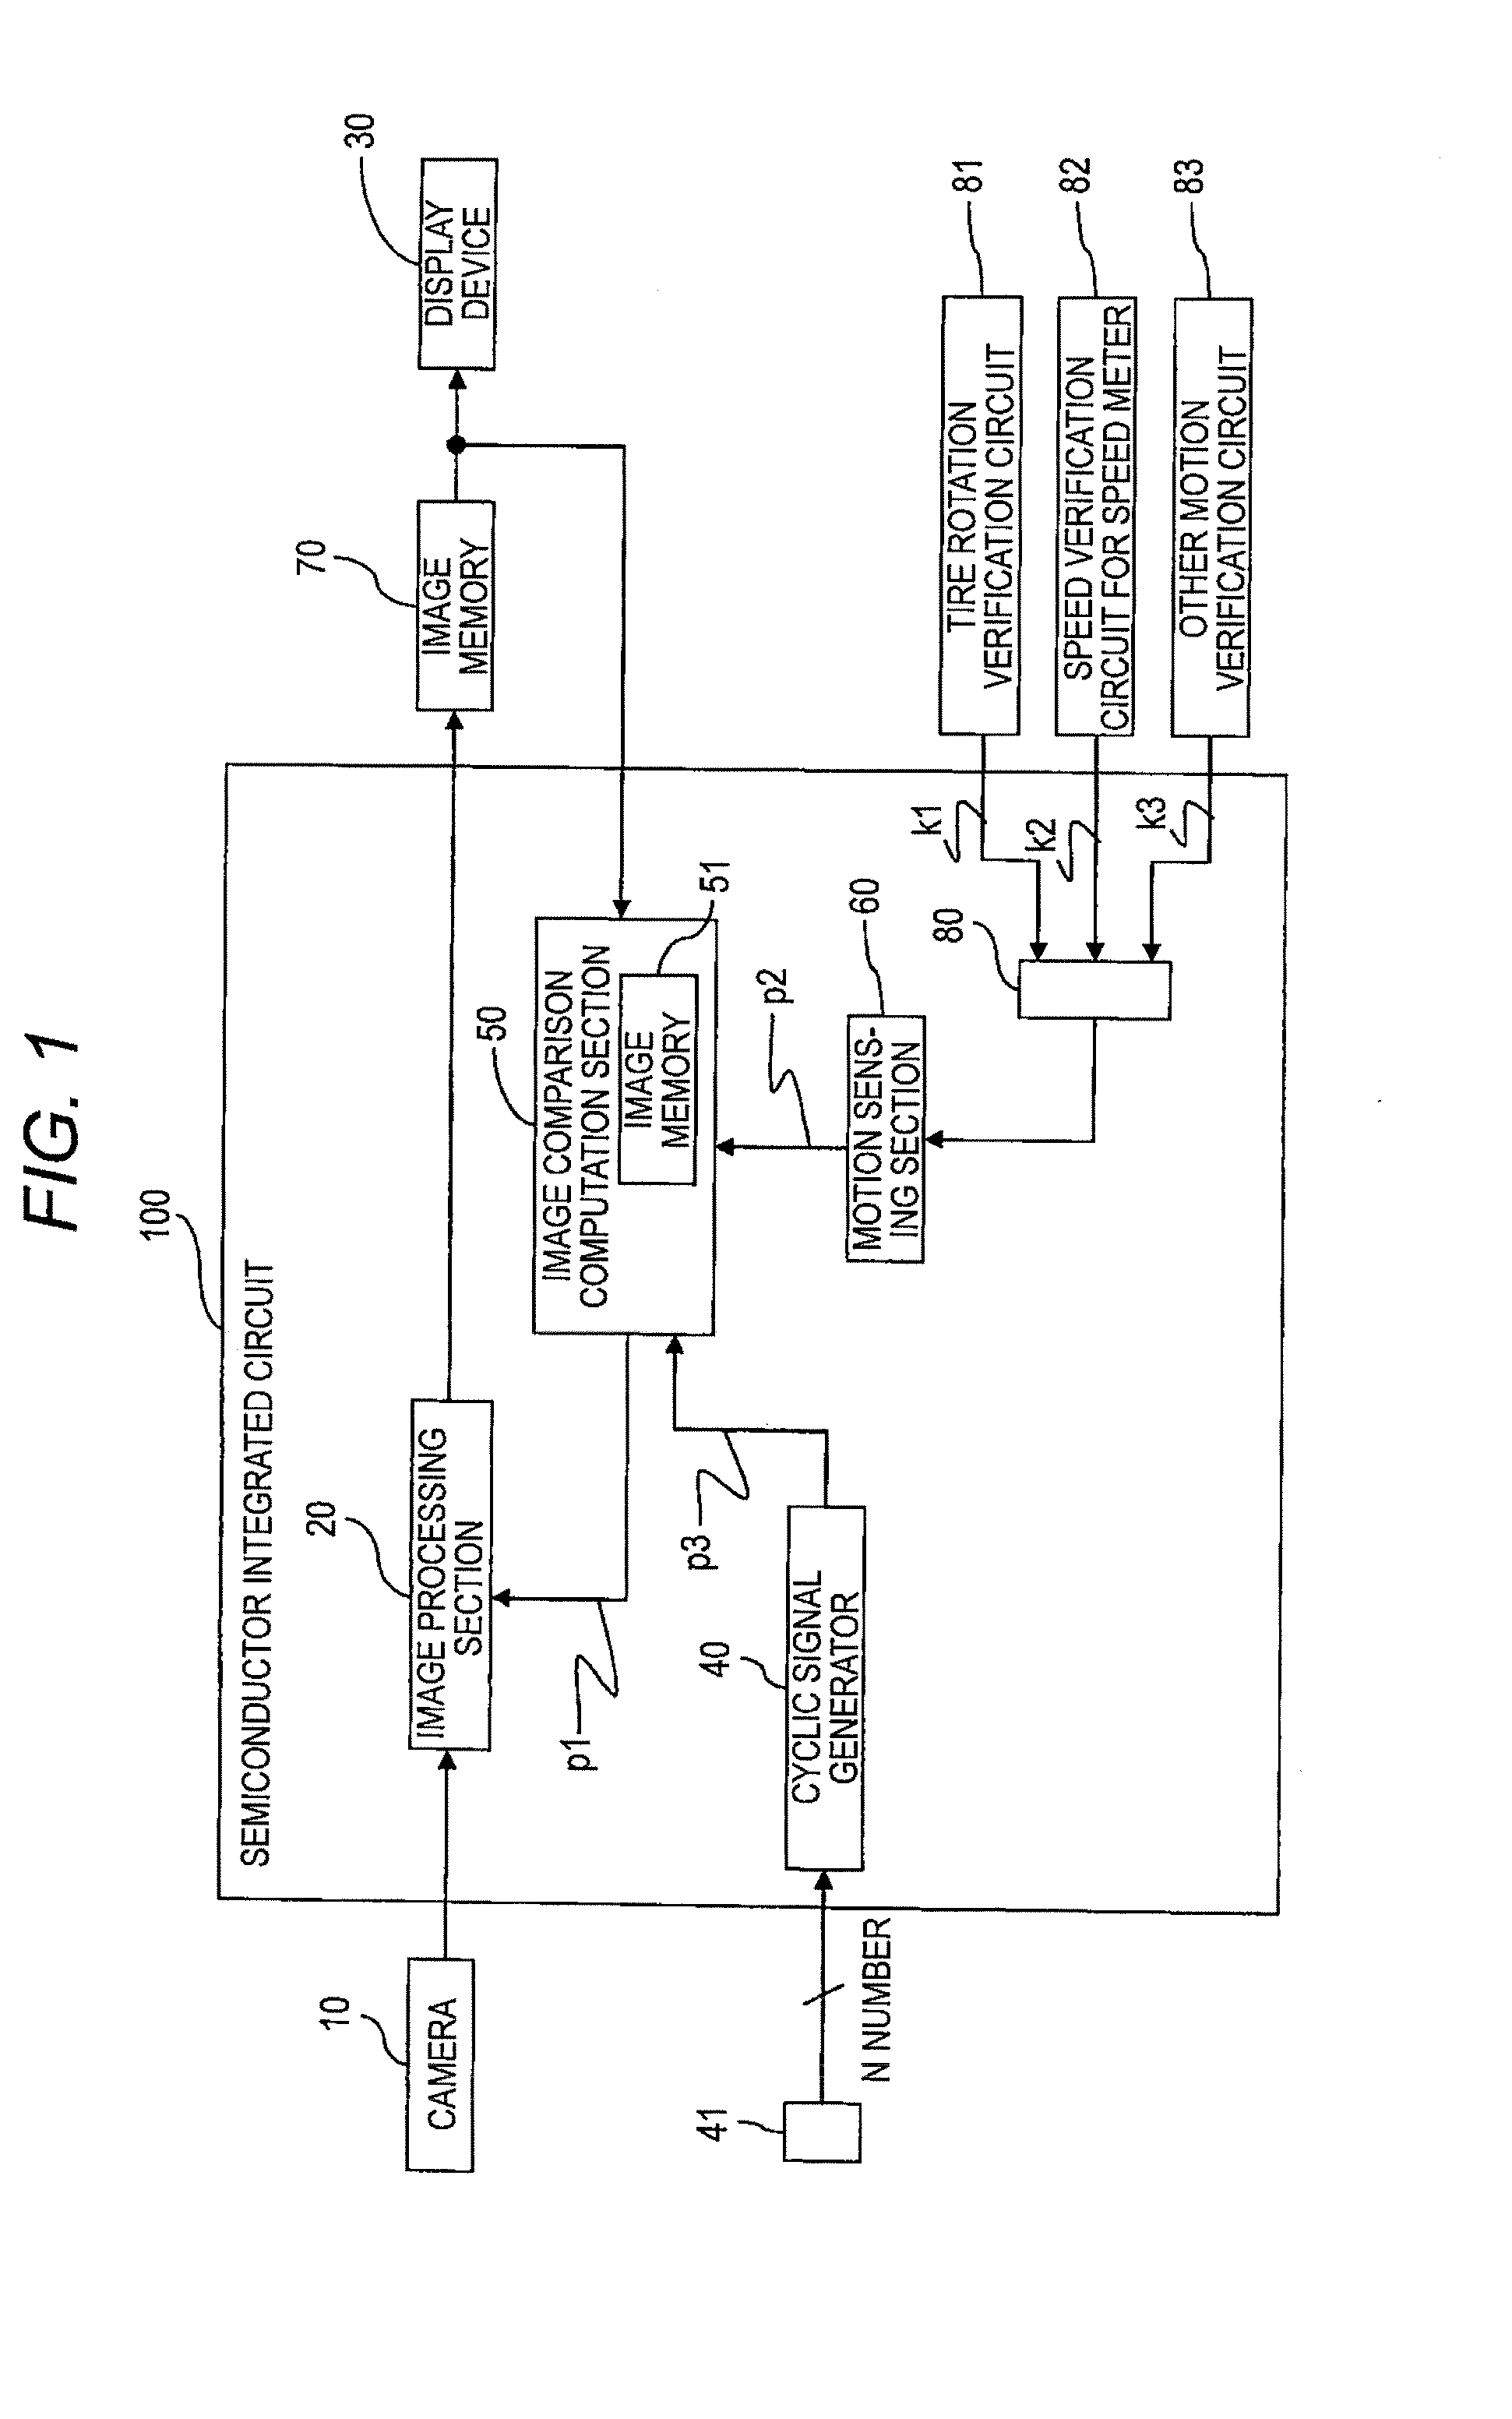 Monitoring system, method for controlling the same, and semiconductor integrated circuit for the same